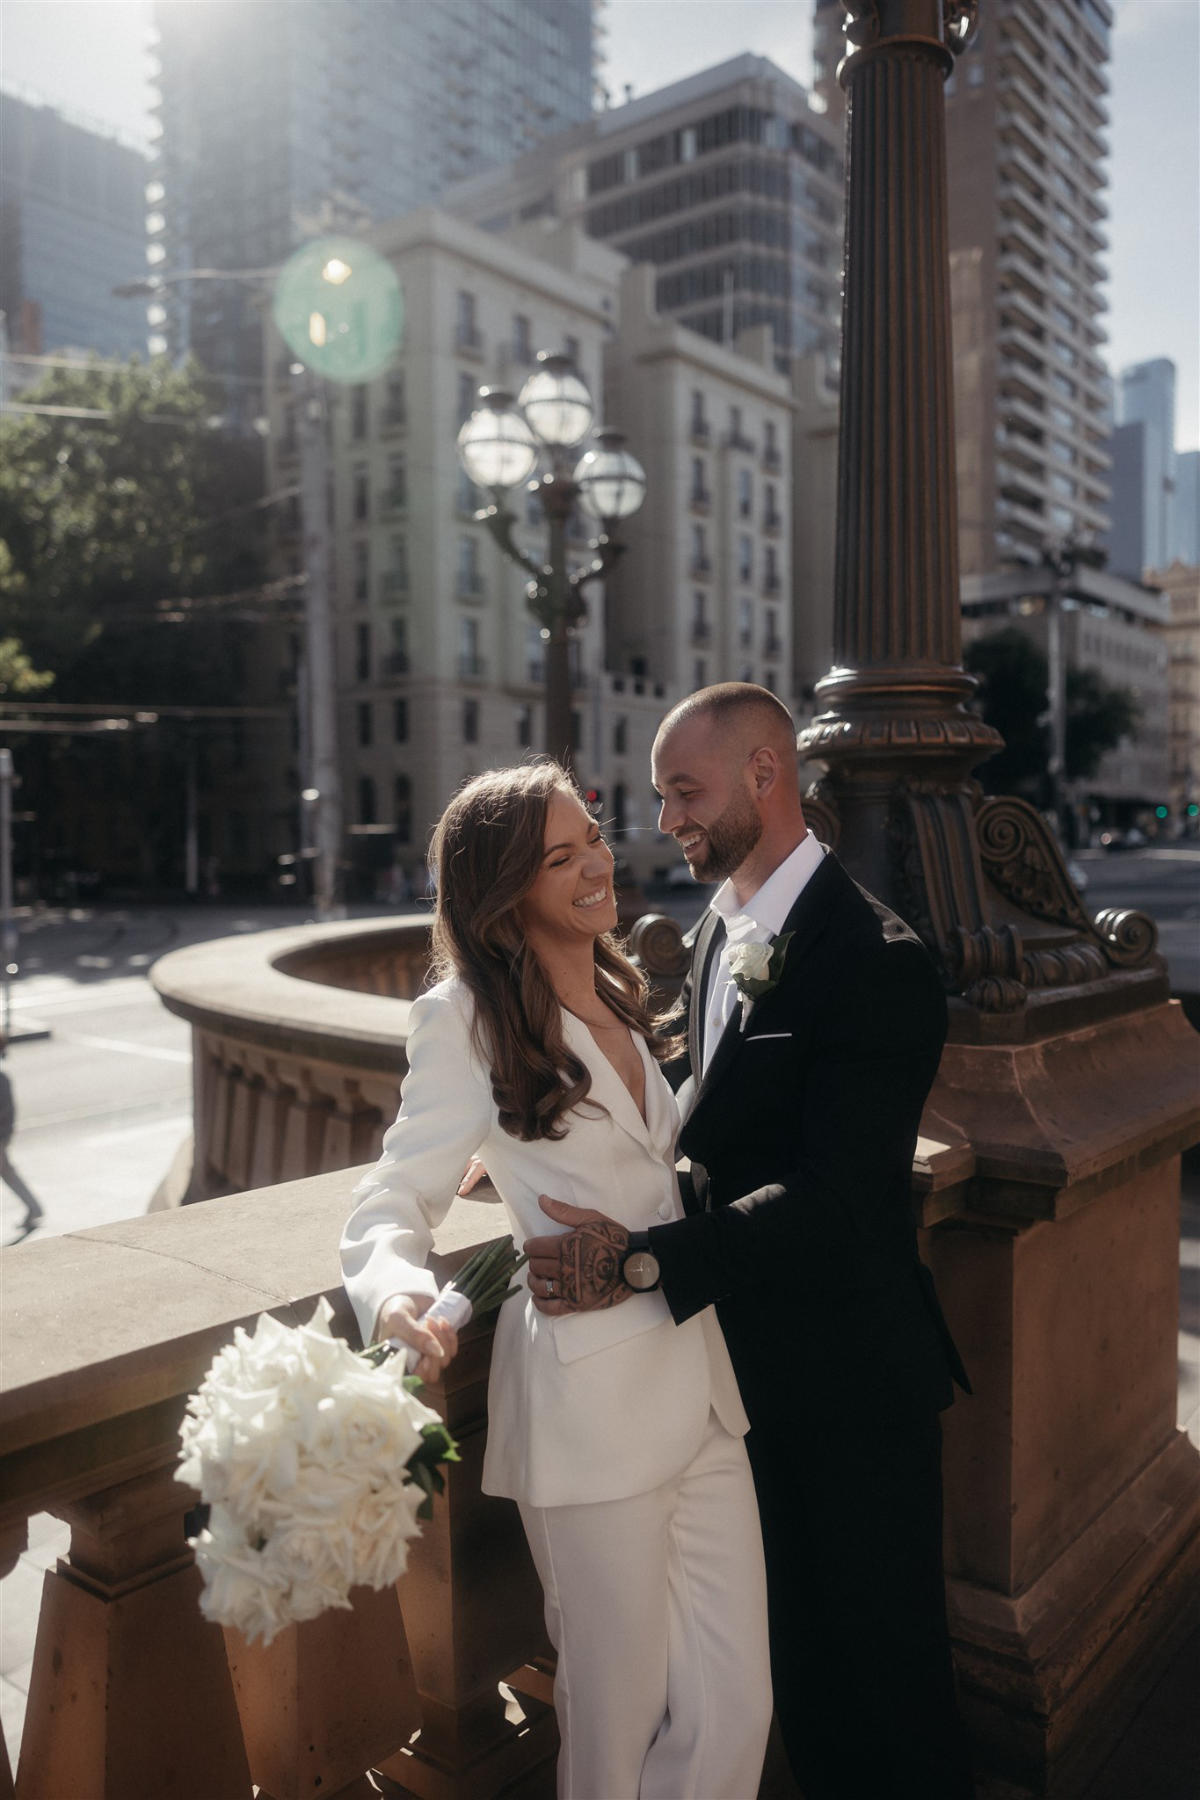 Amelia and Michael's courthouse wedding captured by Maegan Brown Moments